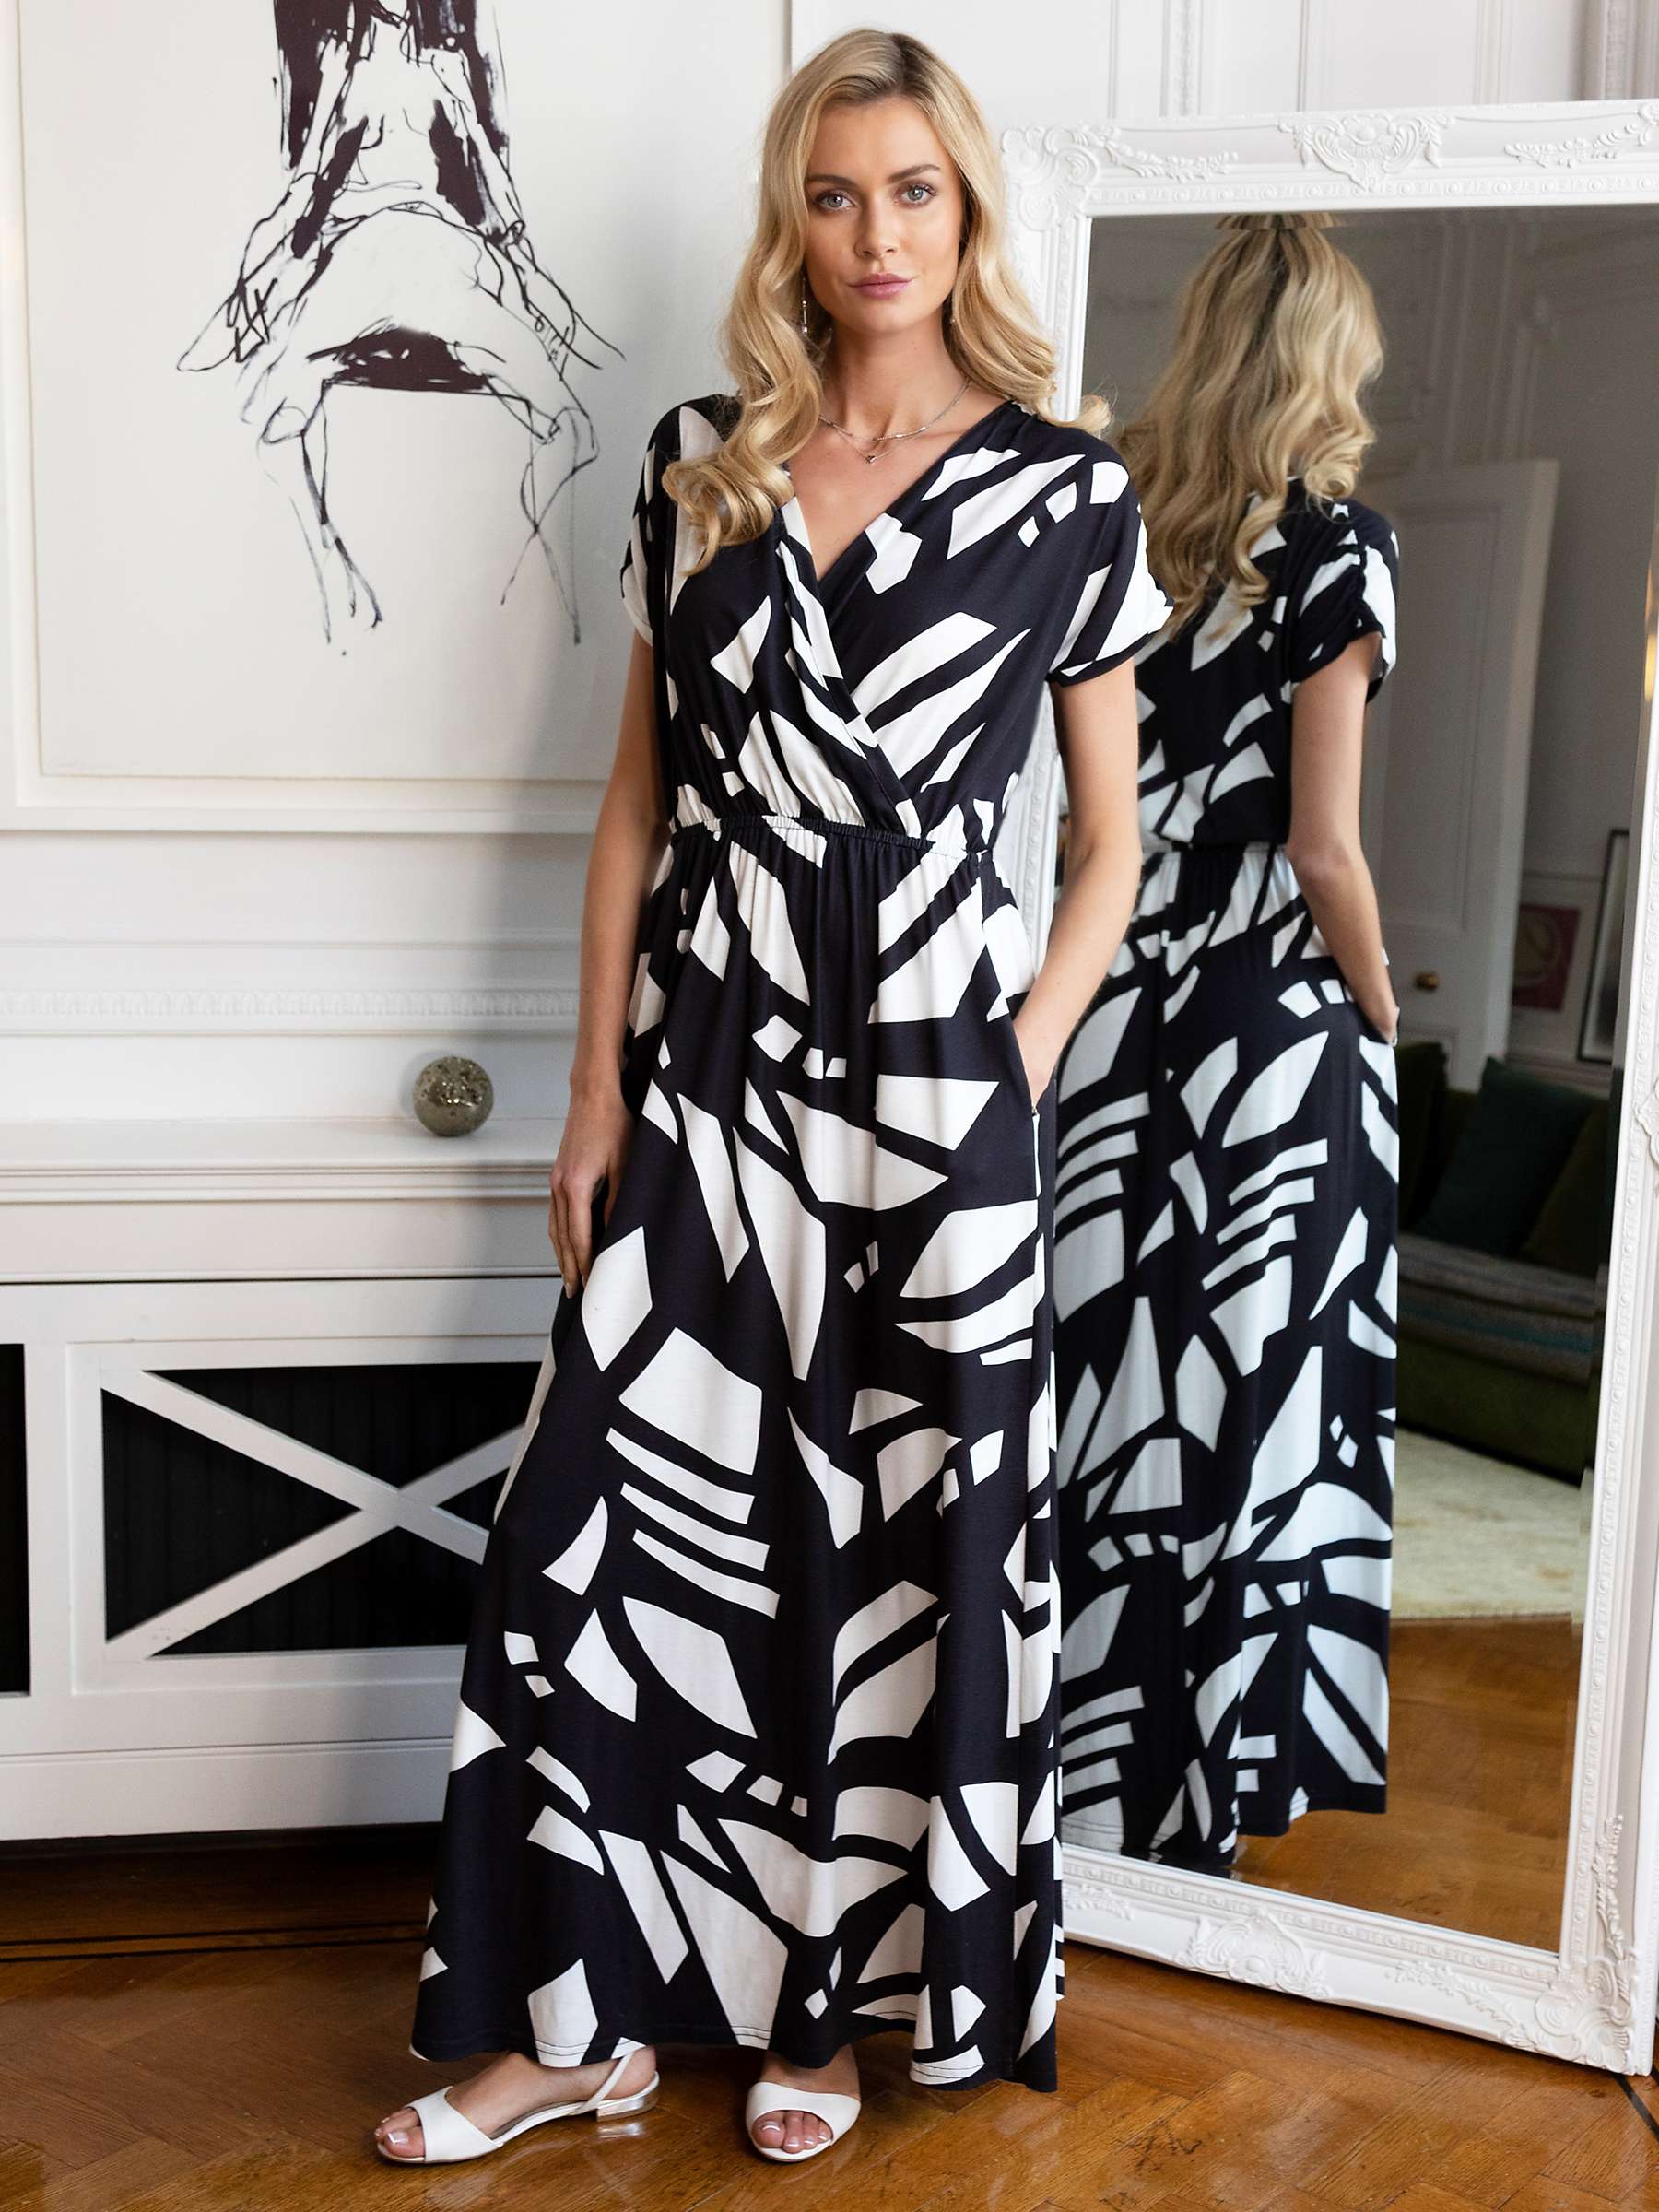 Buy HotSquash Iconic Abstract Print Maxi Dress, Matisse Black/White Online at johnlewis.com